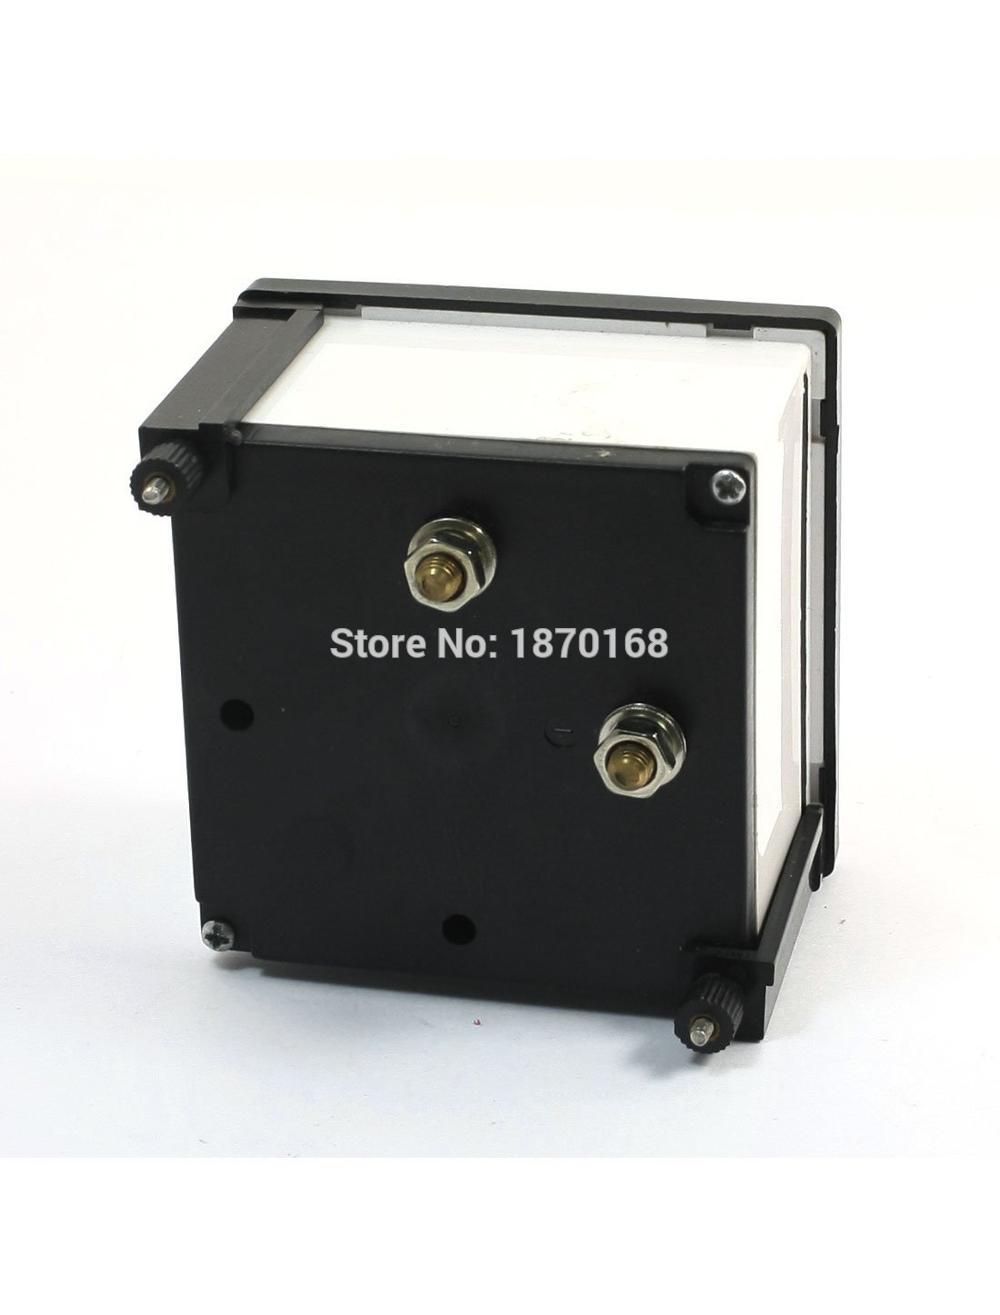 SQ-72 AC 0-30A 30A/5A SQ72 Square Panel Meter Gauge Current Analogue Analog Ammeter 72*72mm